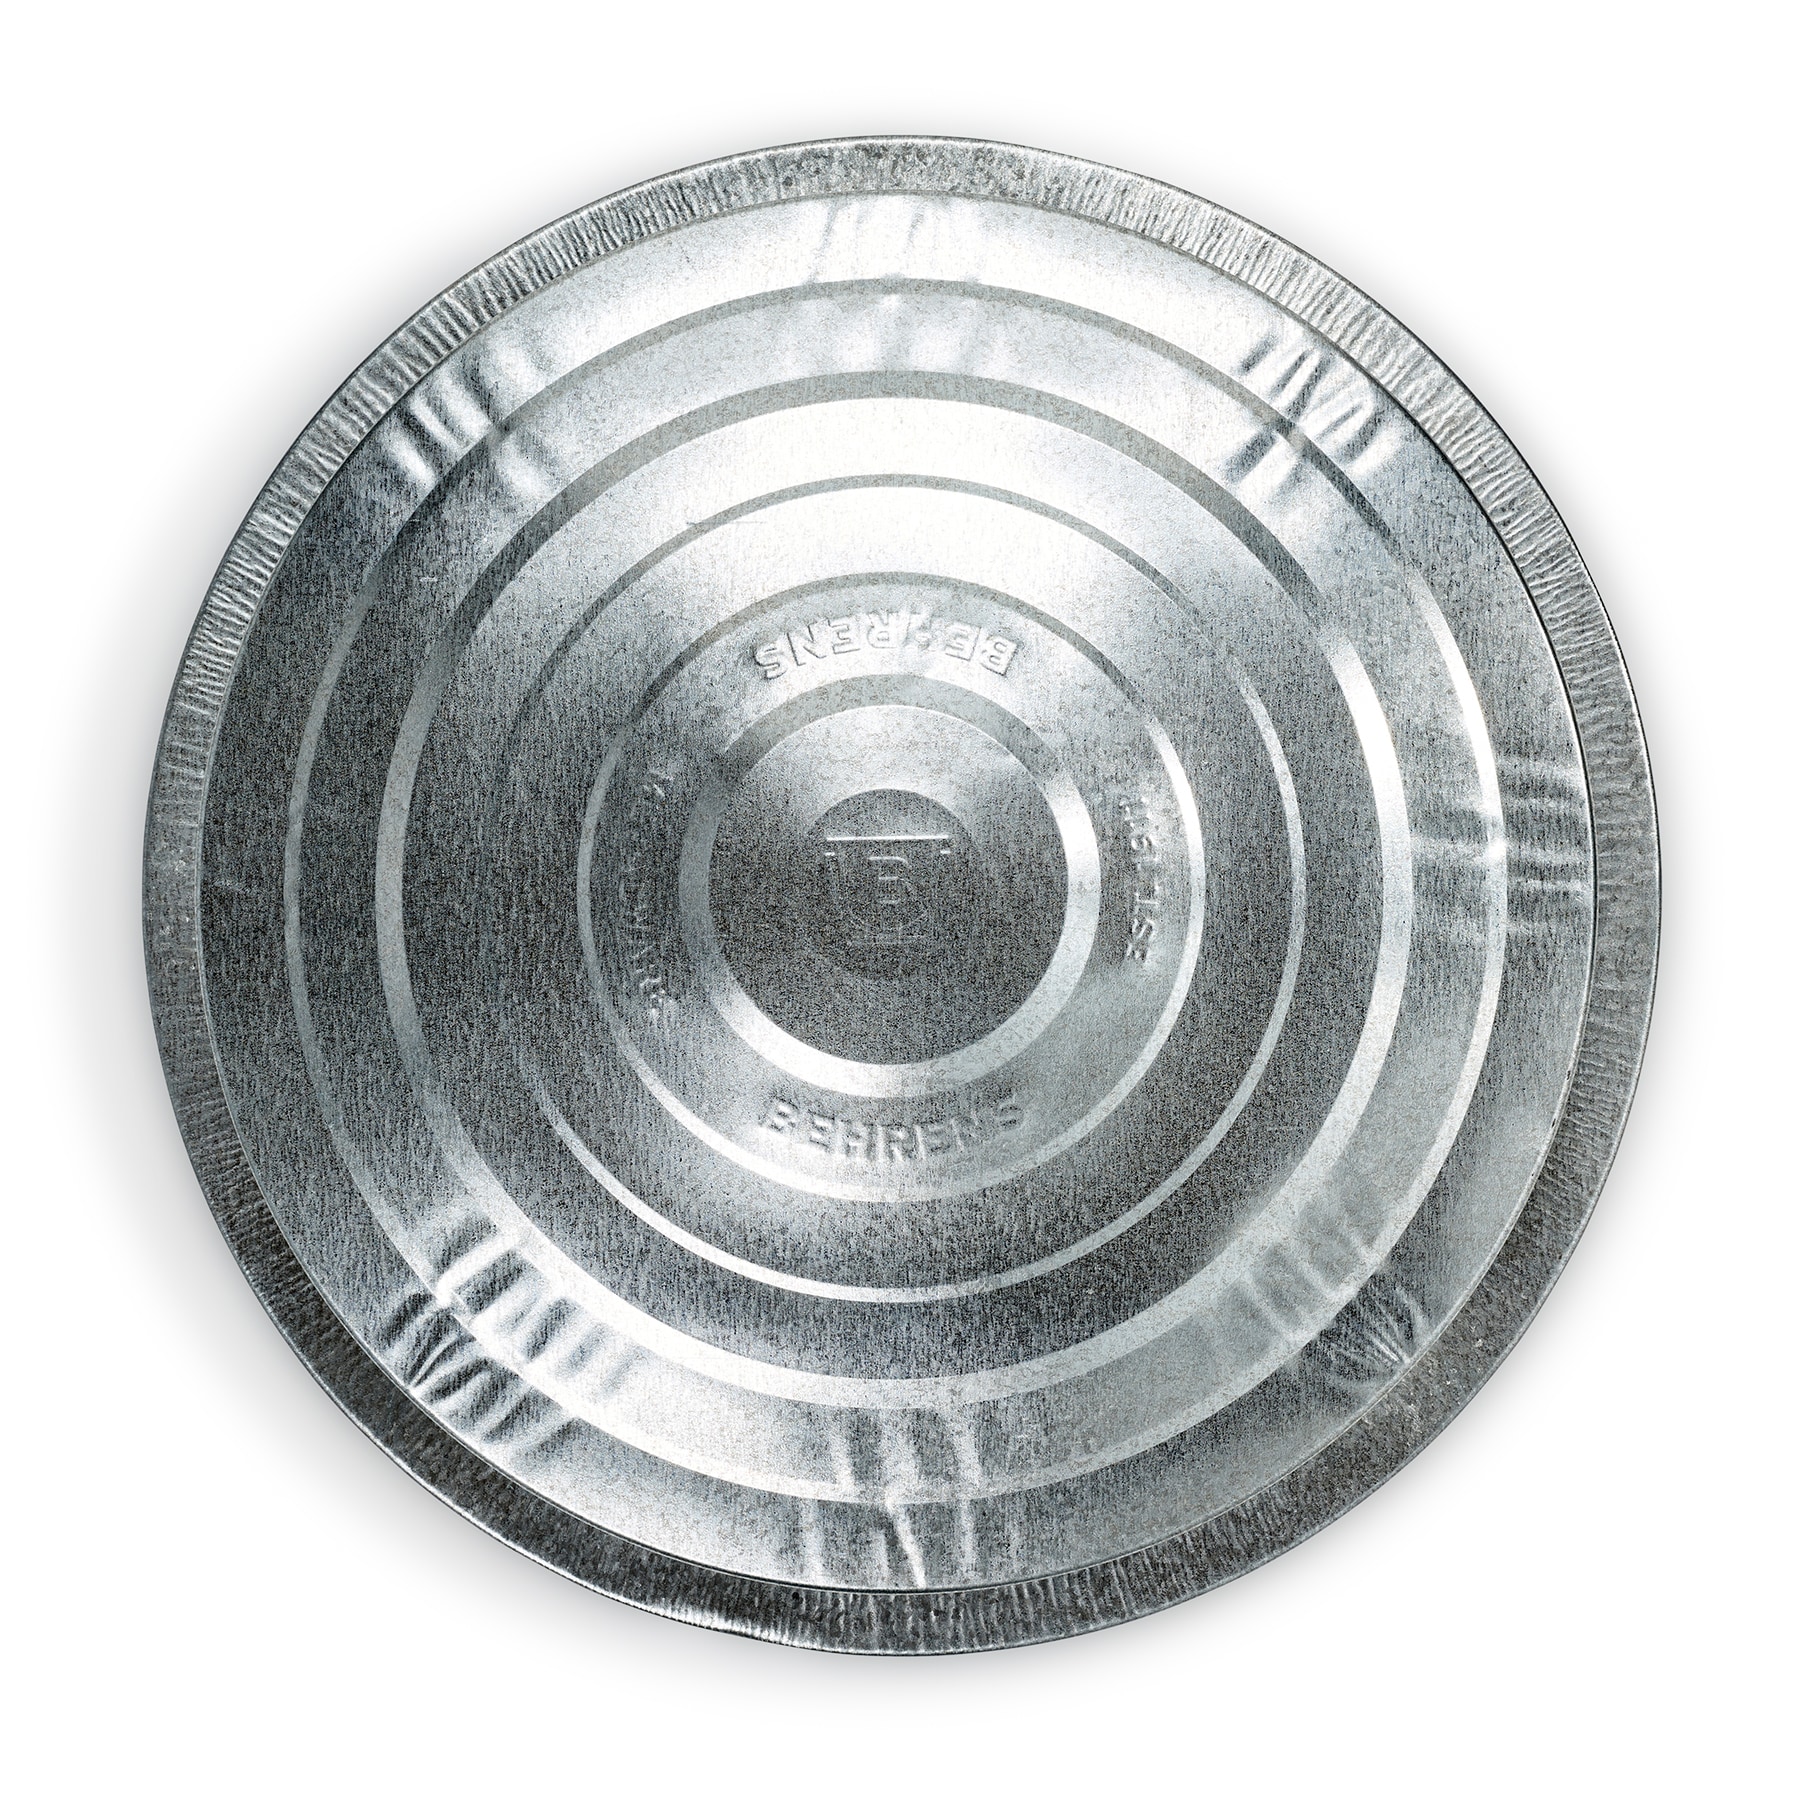 4.8 Round Aluminum Foil Pan with Clear Lid, 8.8oz Disposable